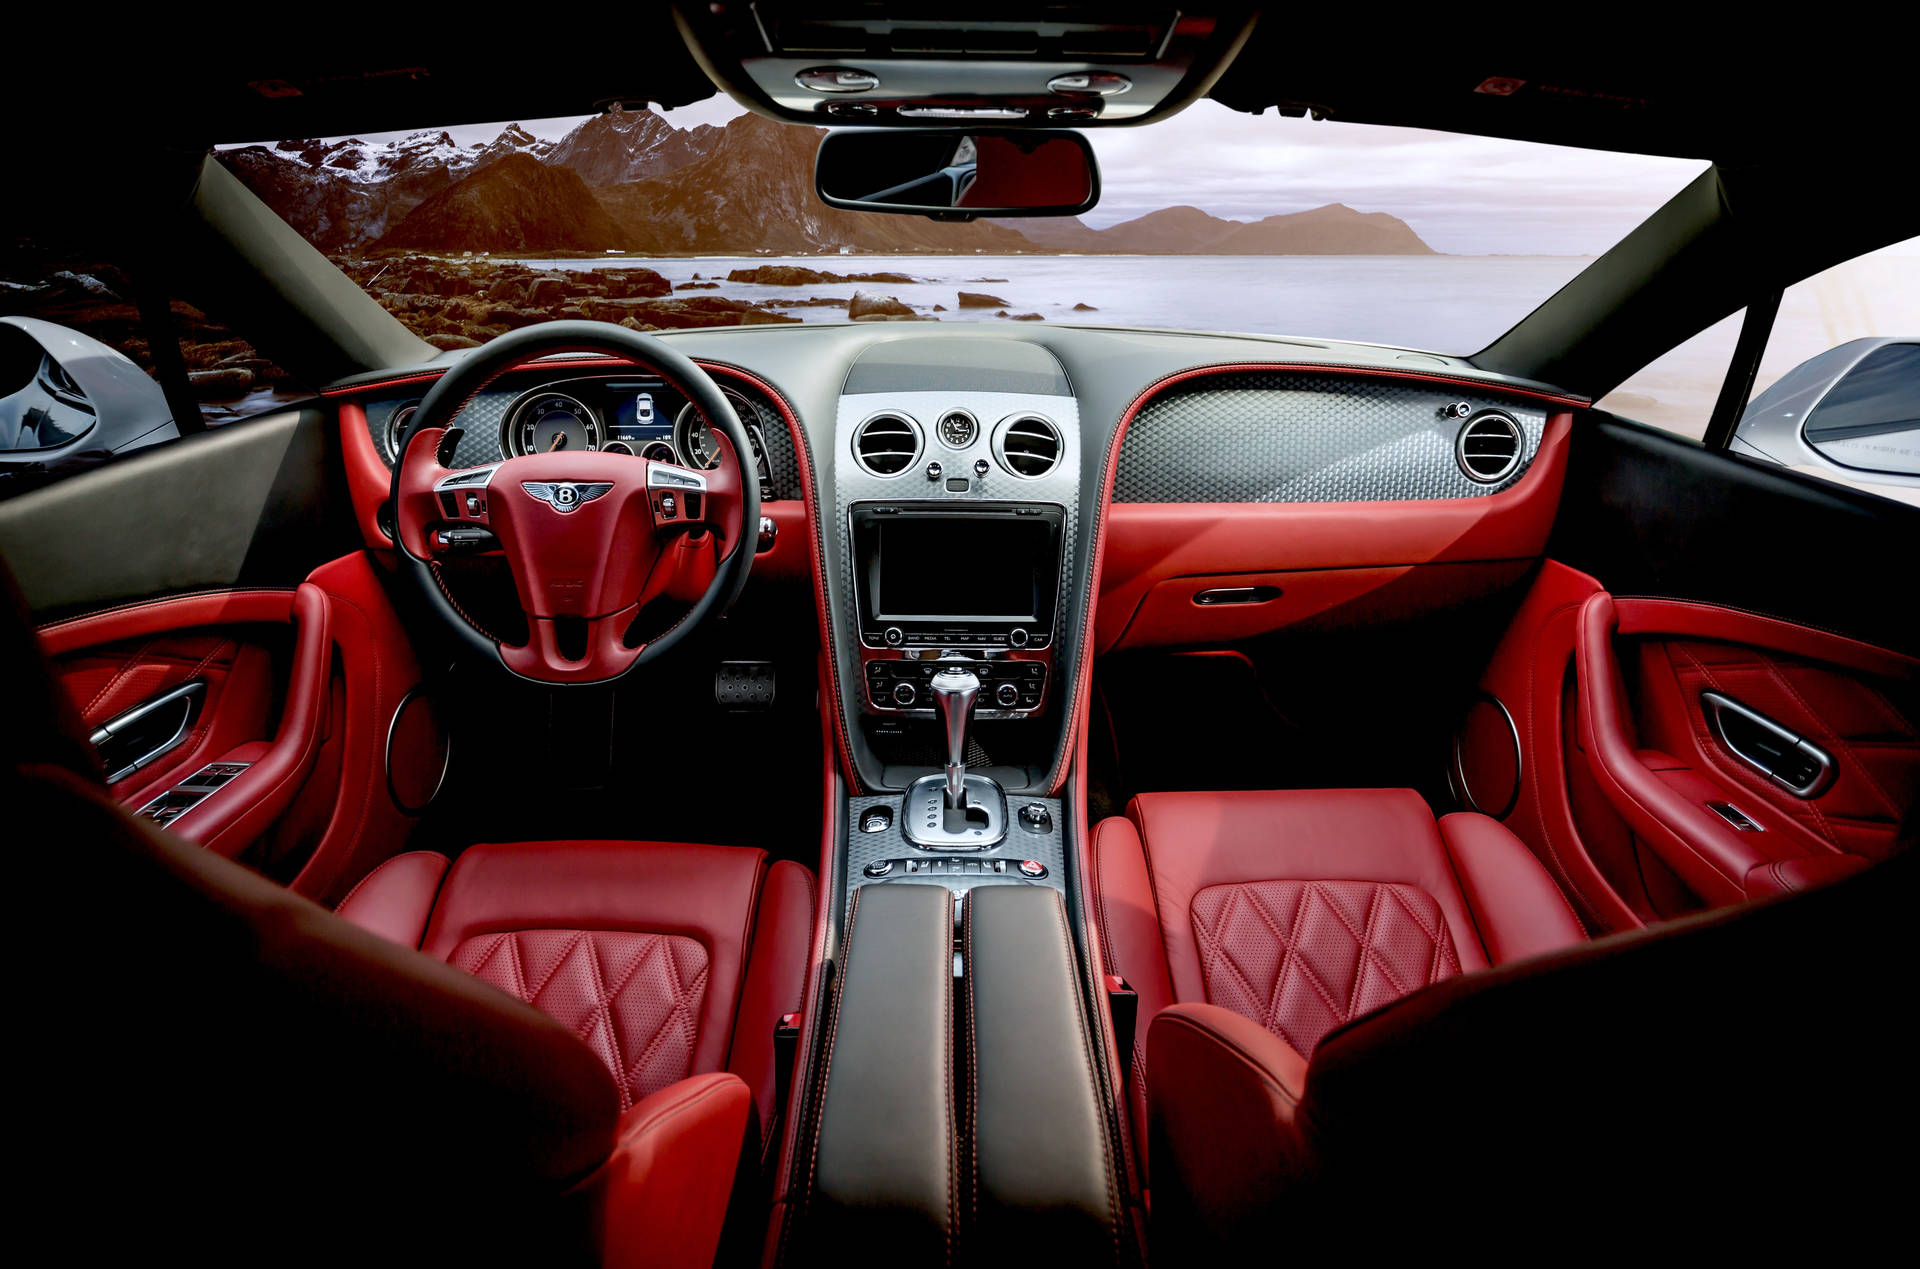 Aesthetic 4k Car With Red Interior